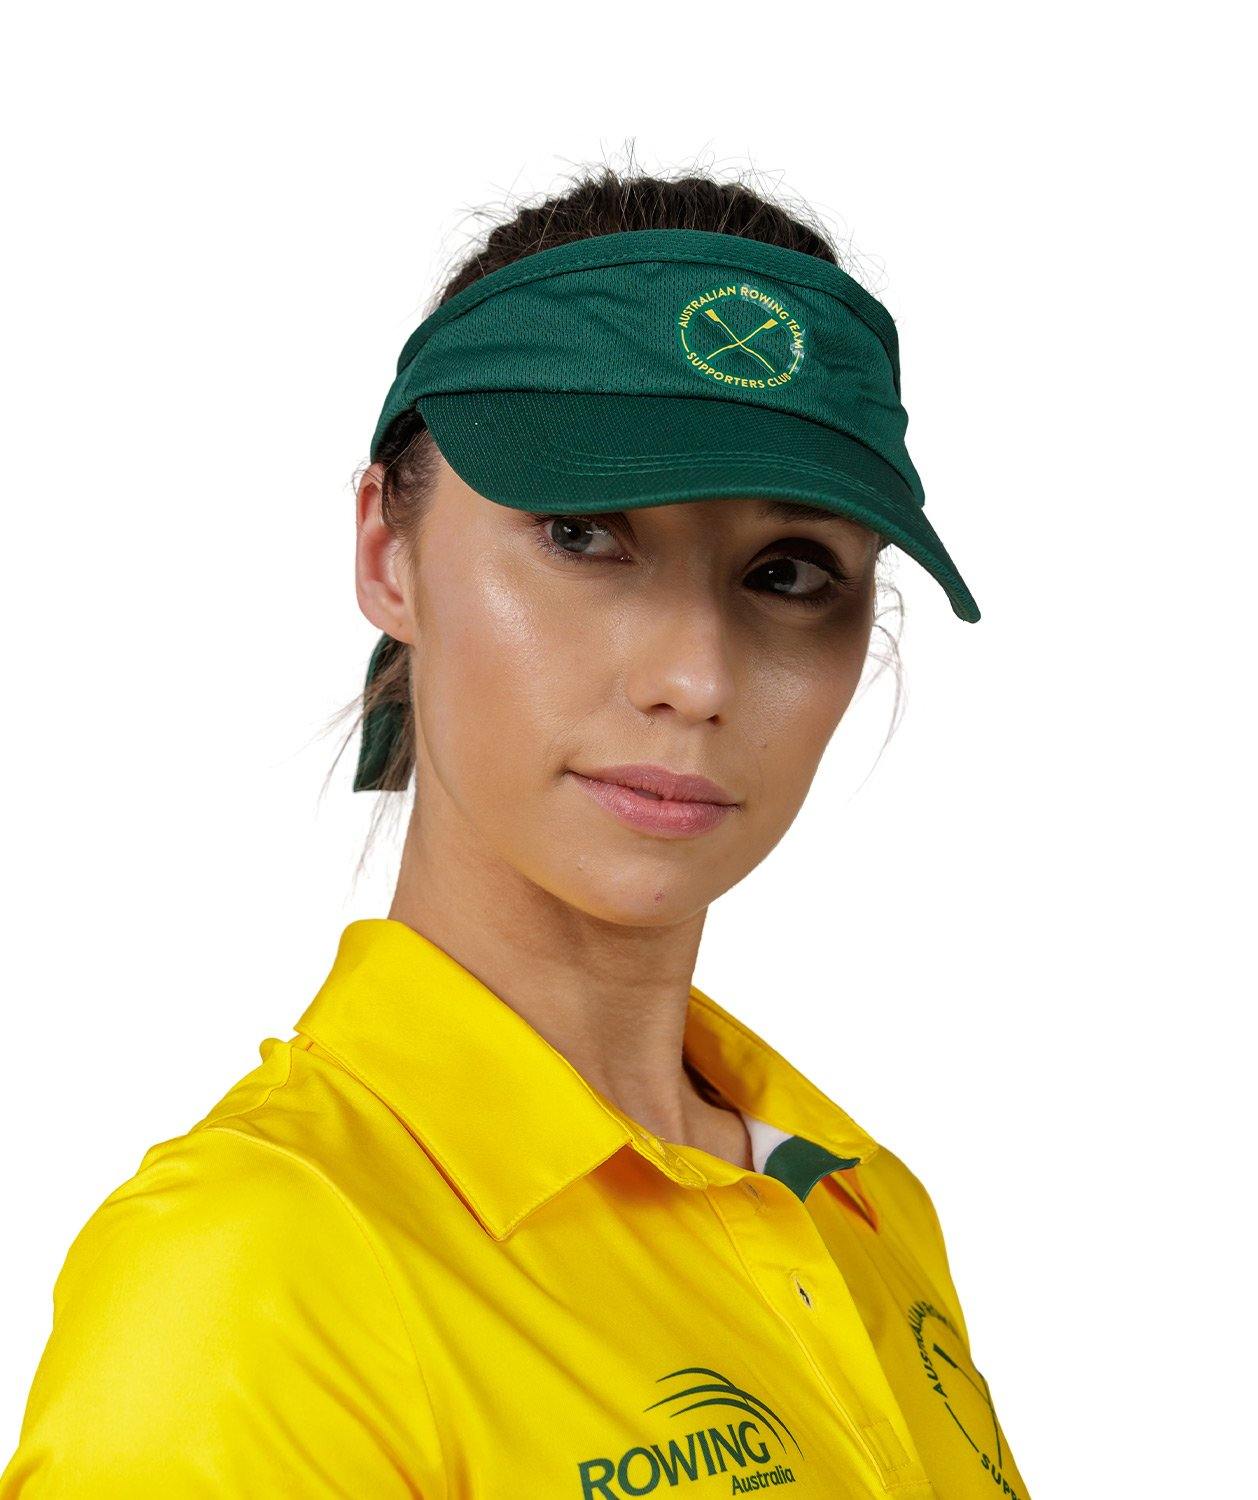 Rowing Australia Supporter – 776BC